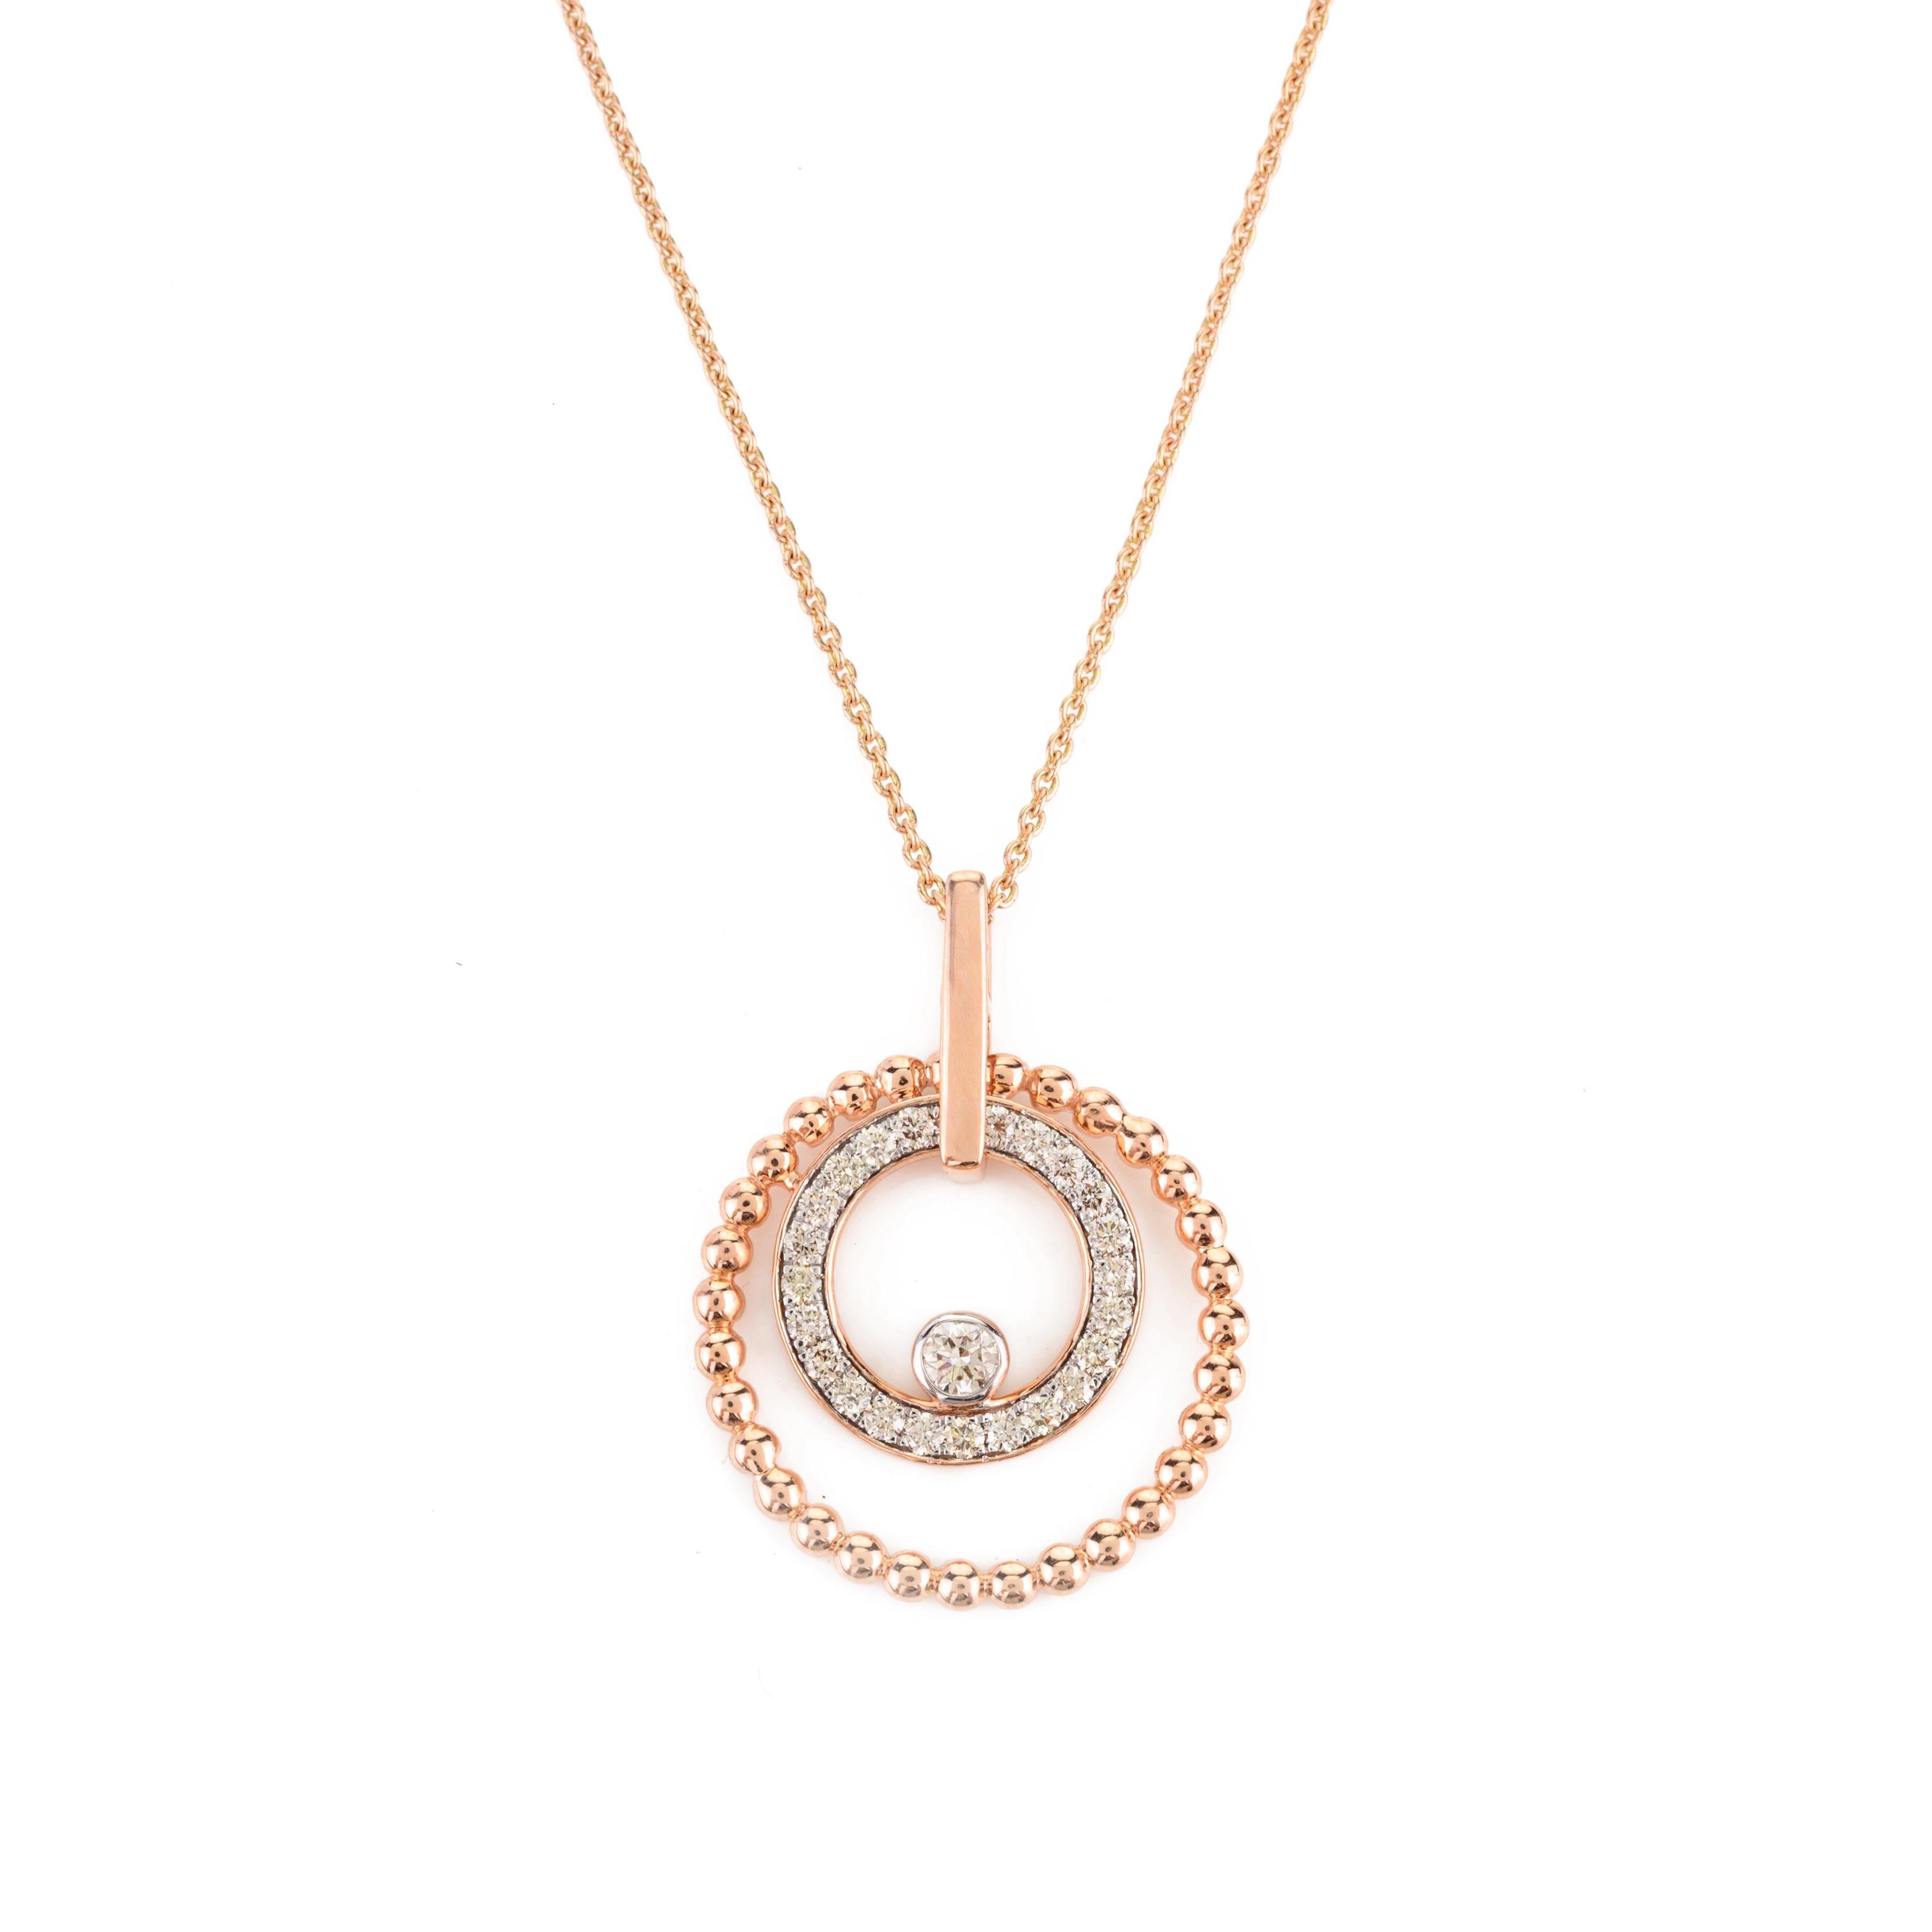 Two Circle Spiral Diamond Pendant Necklace in 14K gold studded with round cut diamond. This stunning piece of jewelry instantly elevates a casual look or dressy outfit. 
April birthstone diamond brings love, fame, success and prosperity.
Designed